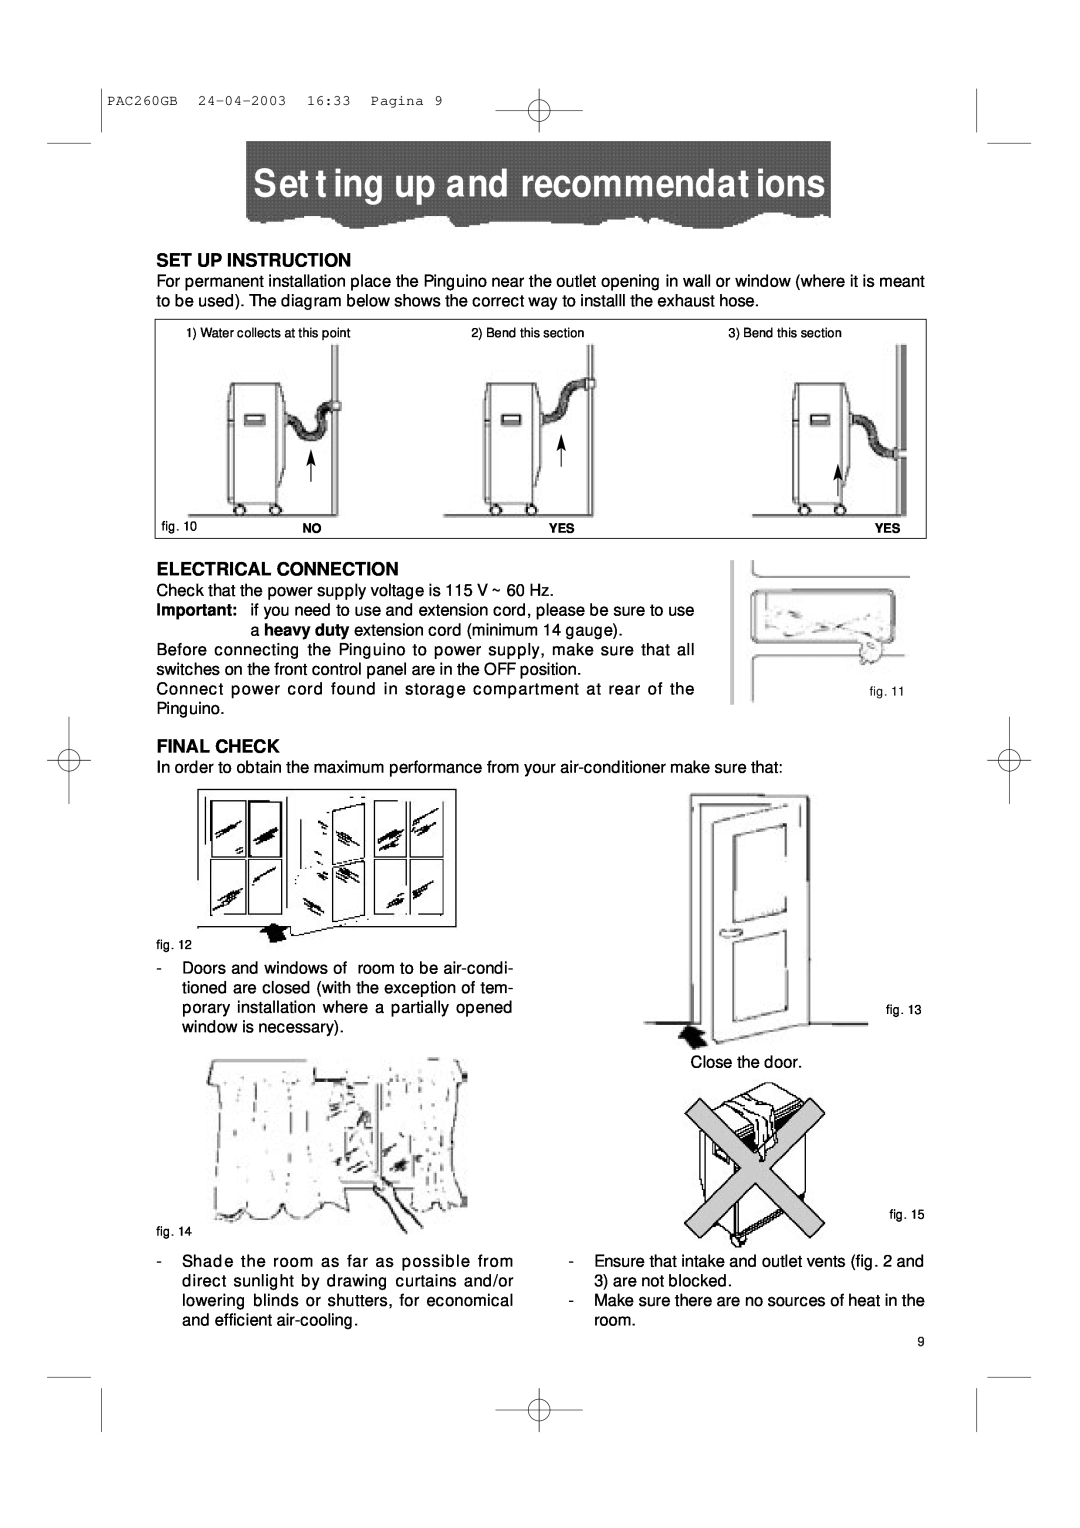 DeLonghi PAC260 manual Setting up and recommendations, Set Up Instruction, Electrical Connection, Final Check 